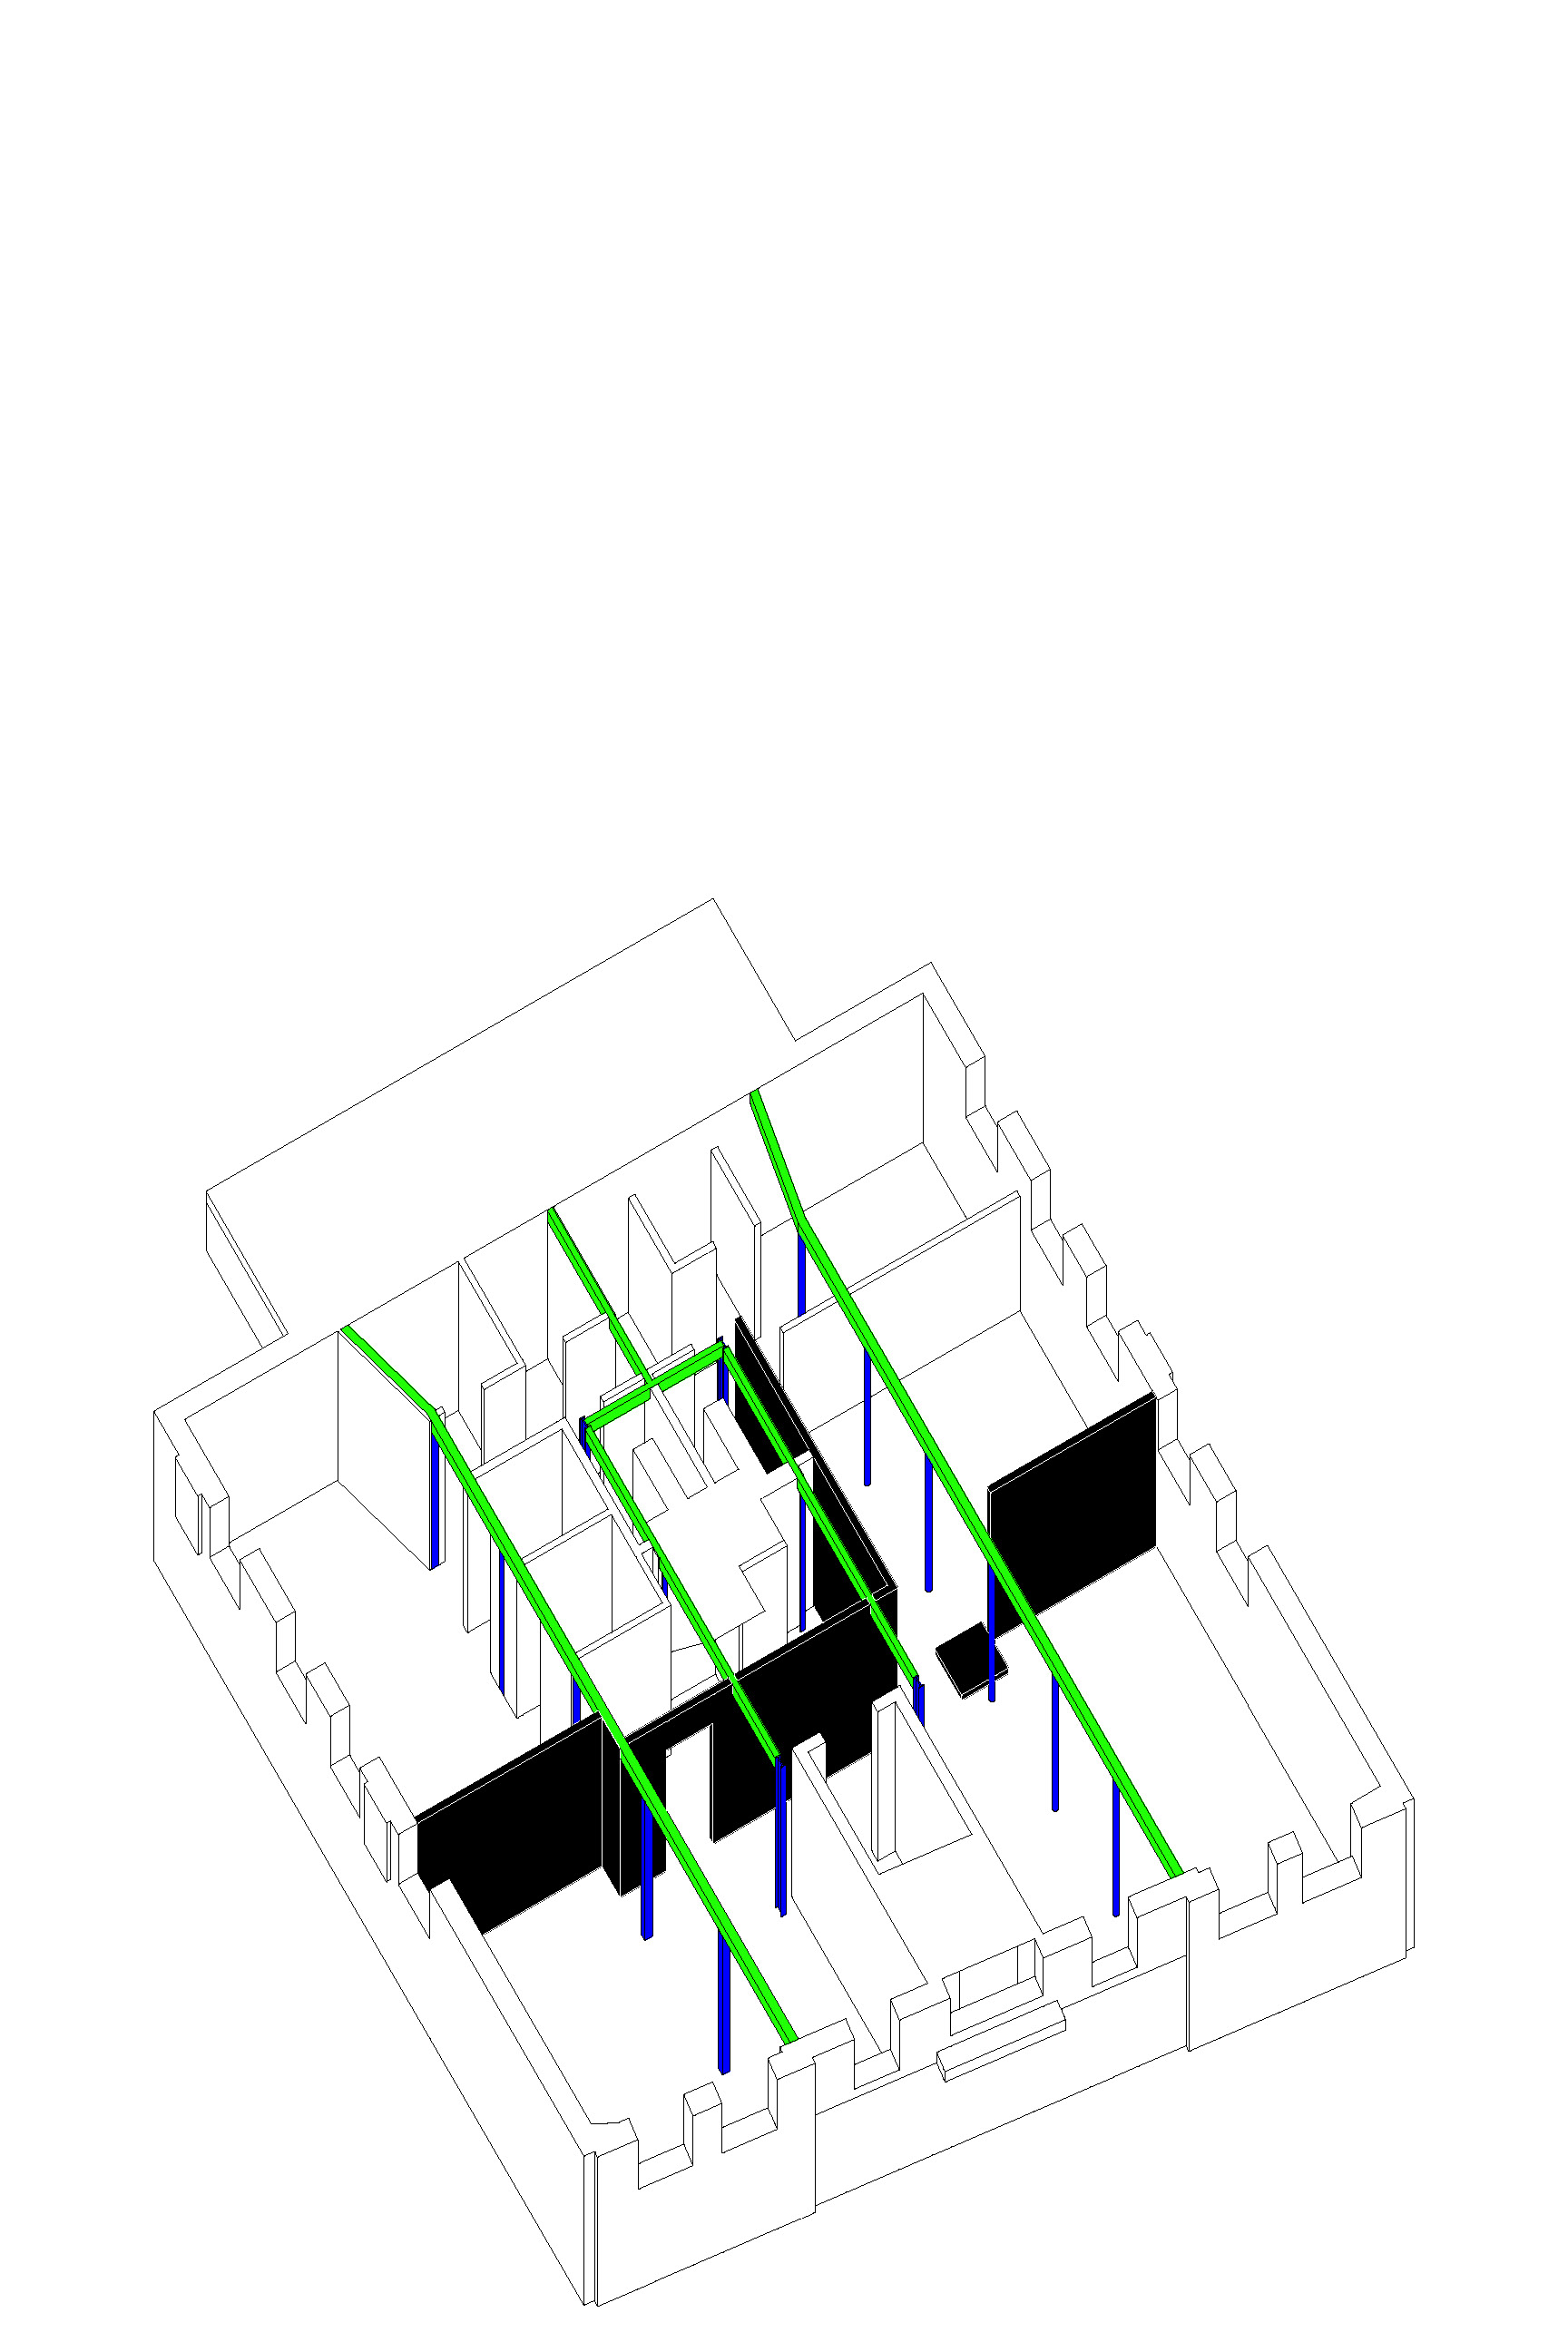 axonometric diagram of proposed rooms and walls